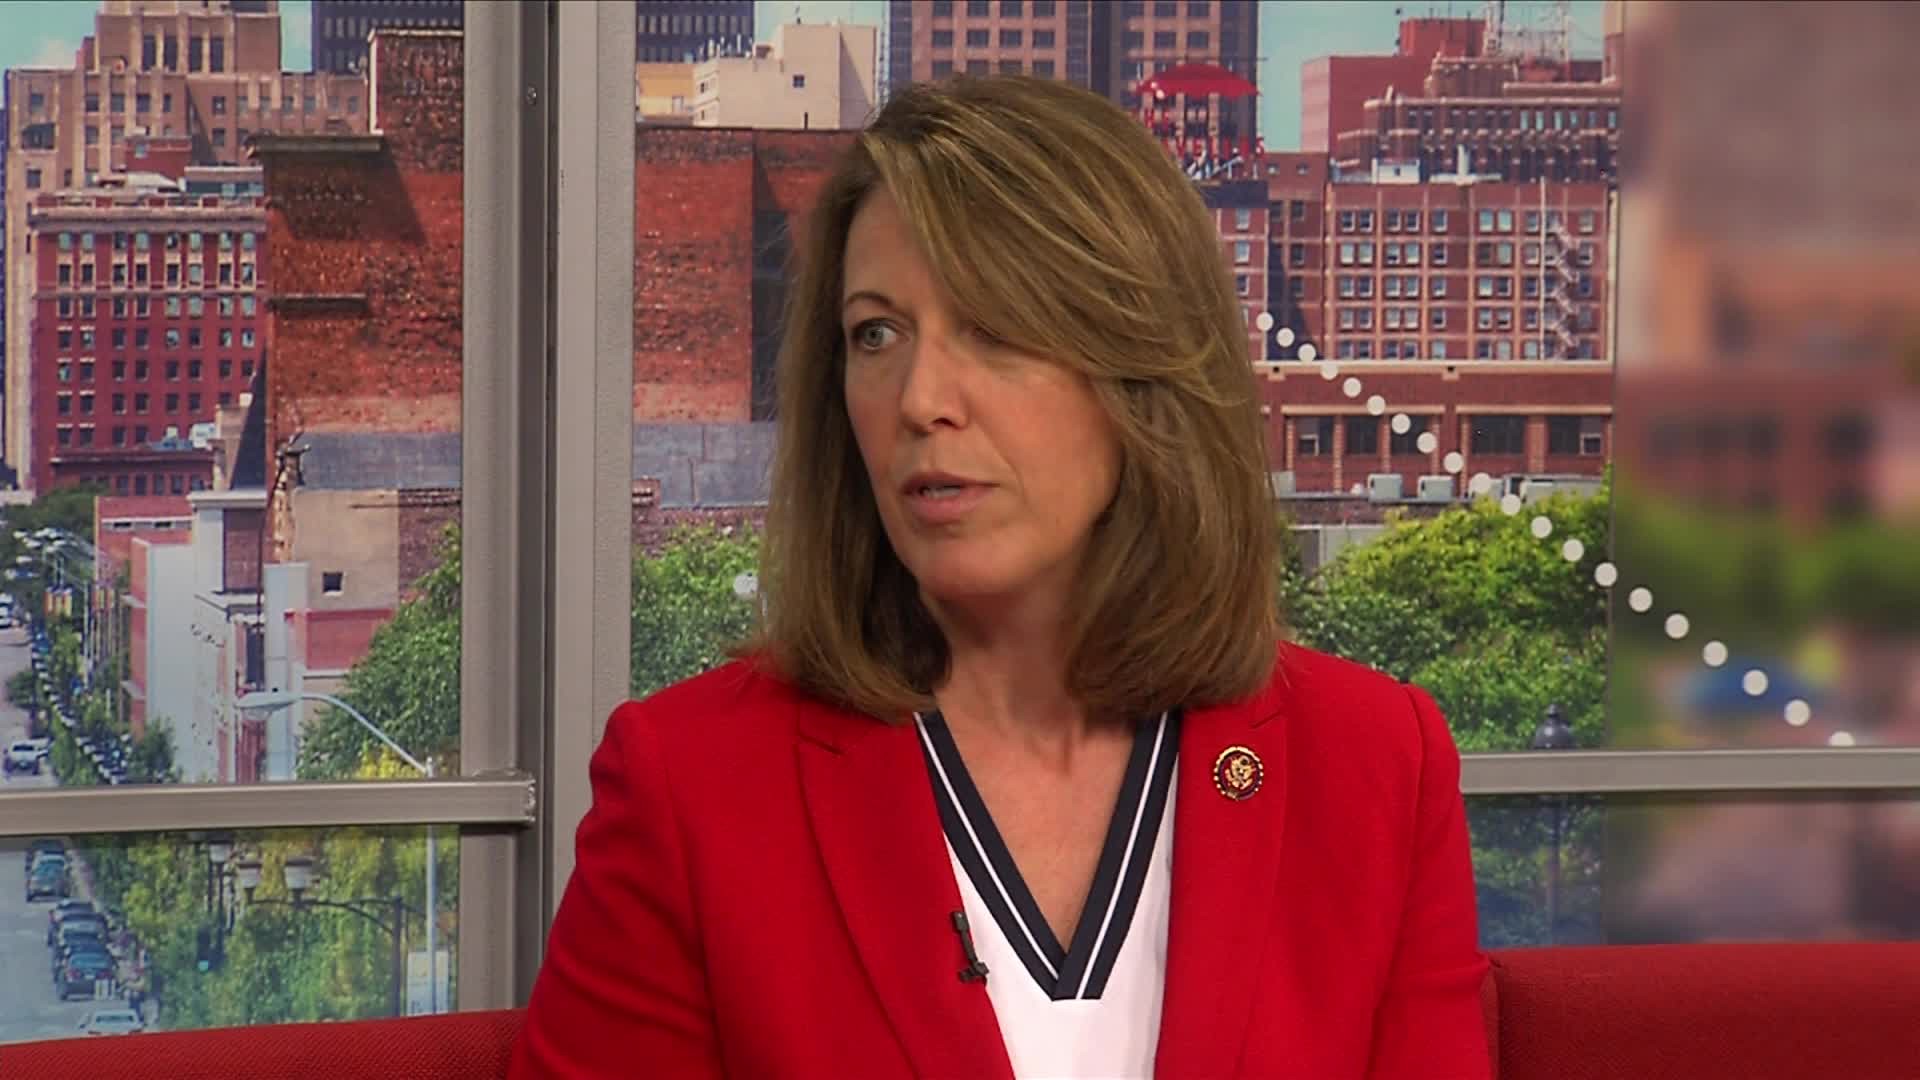 Rep. Axne says treatment of migrants is unacceptable